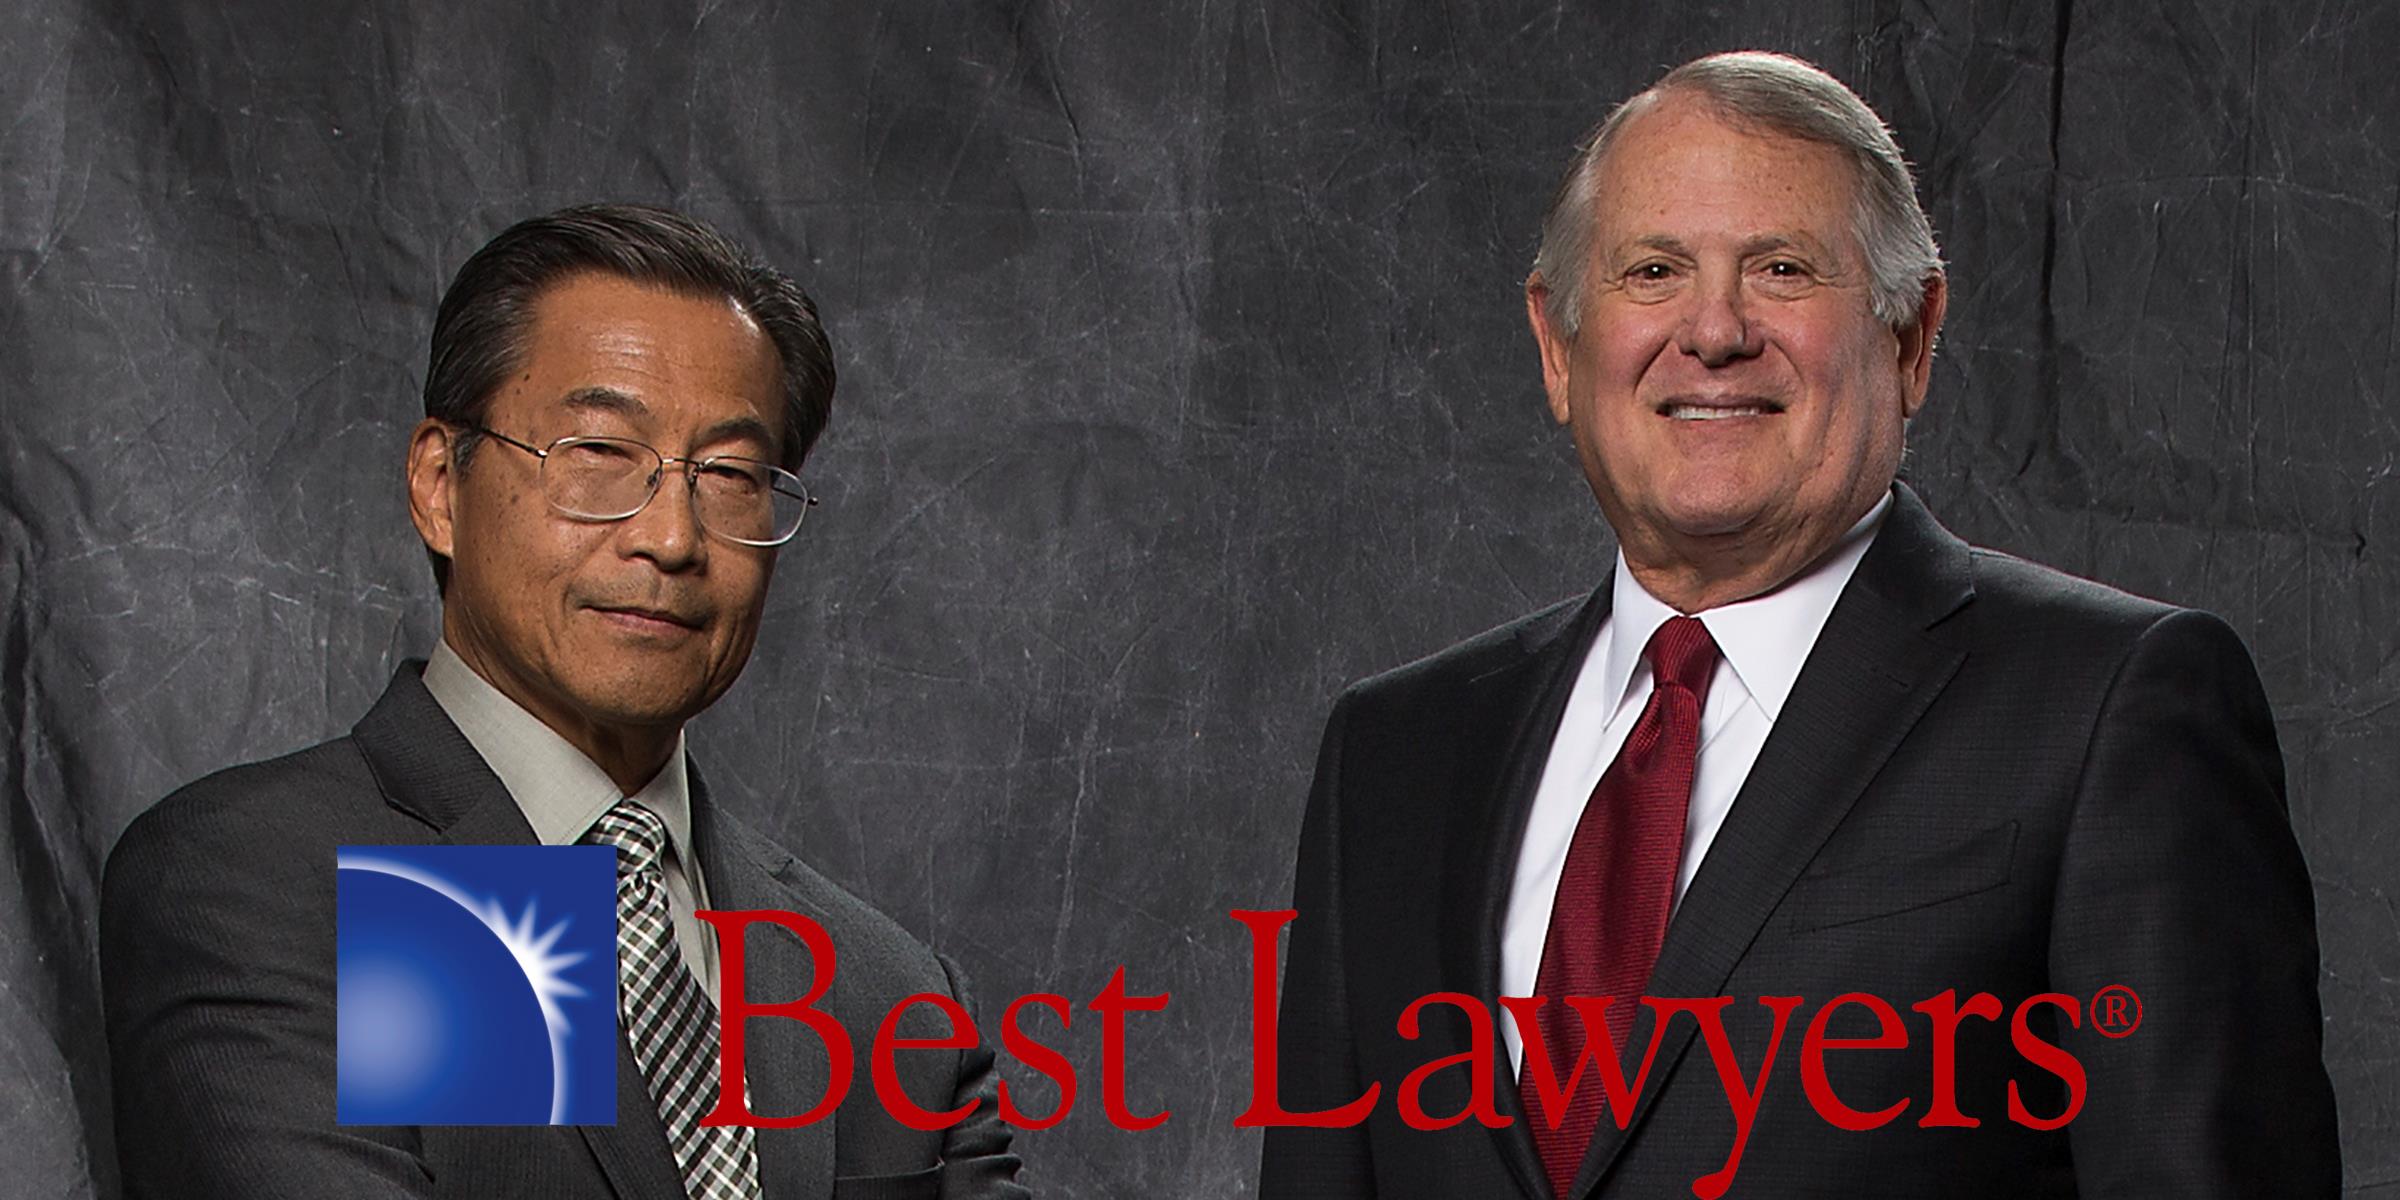 Chain | Cohn | Clark partners David Cohn, James Yoro selected into 2020 ‘Best Lawyers in America’ publication